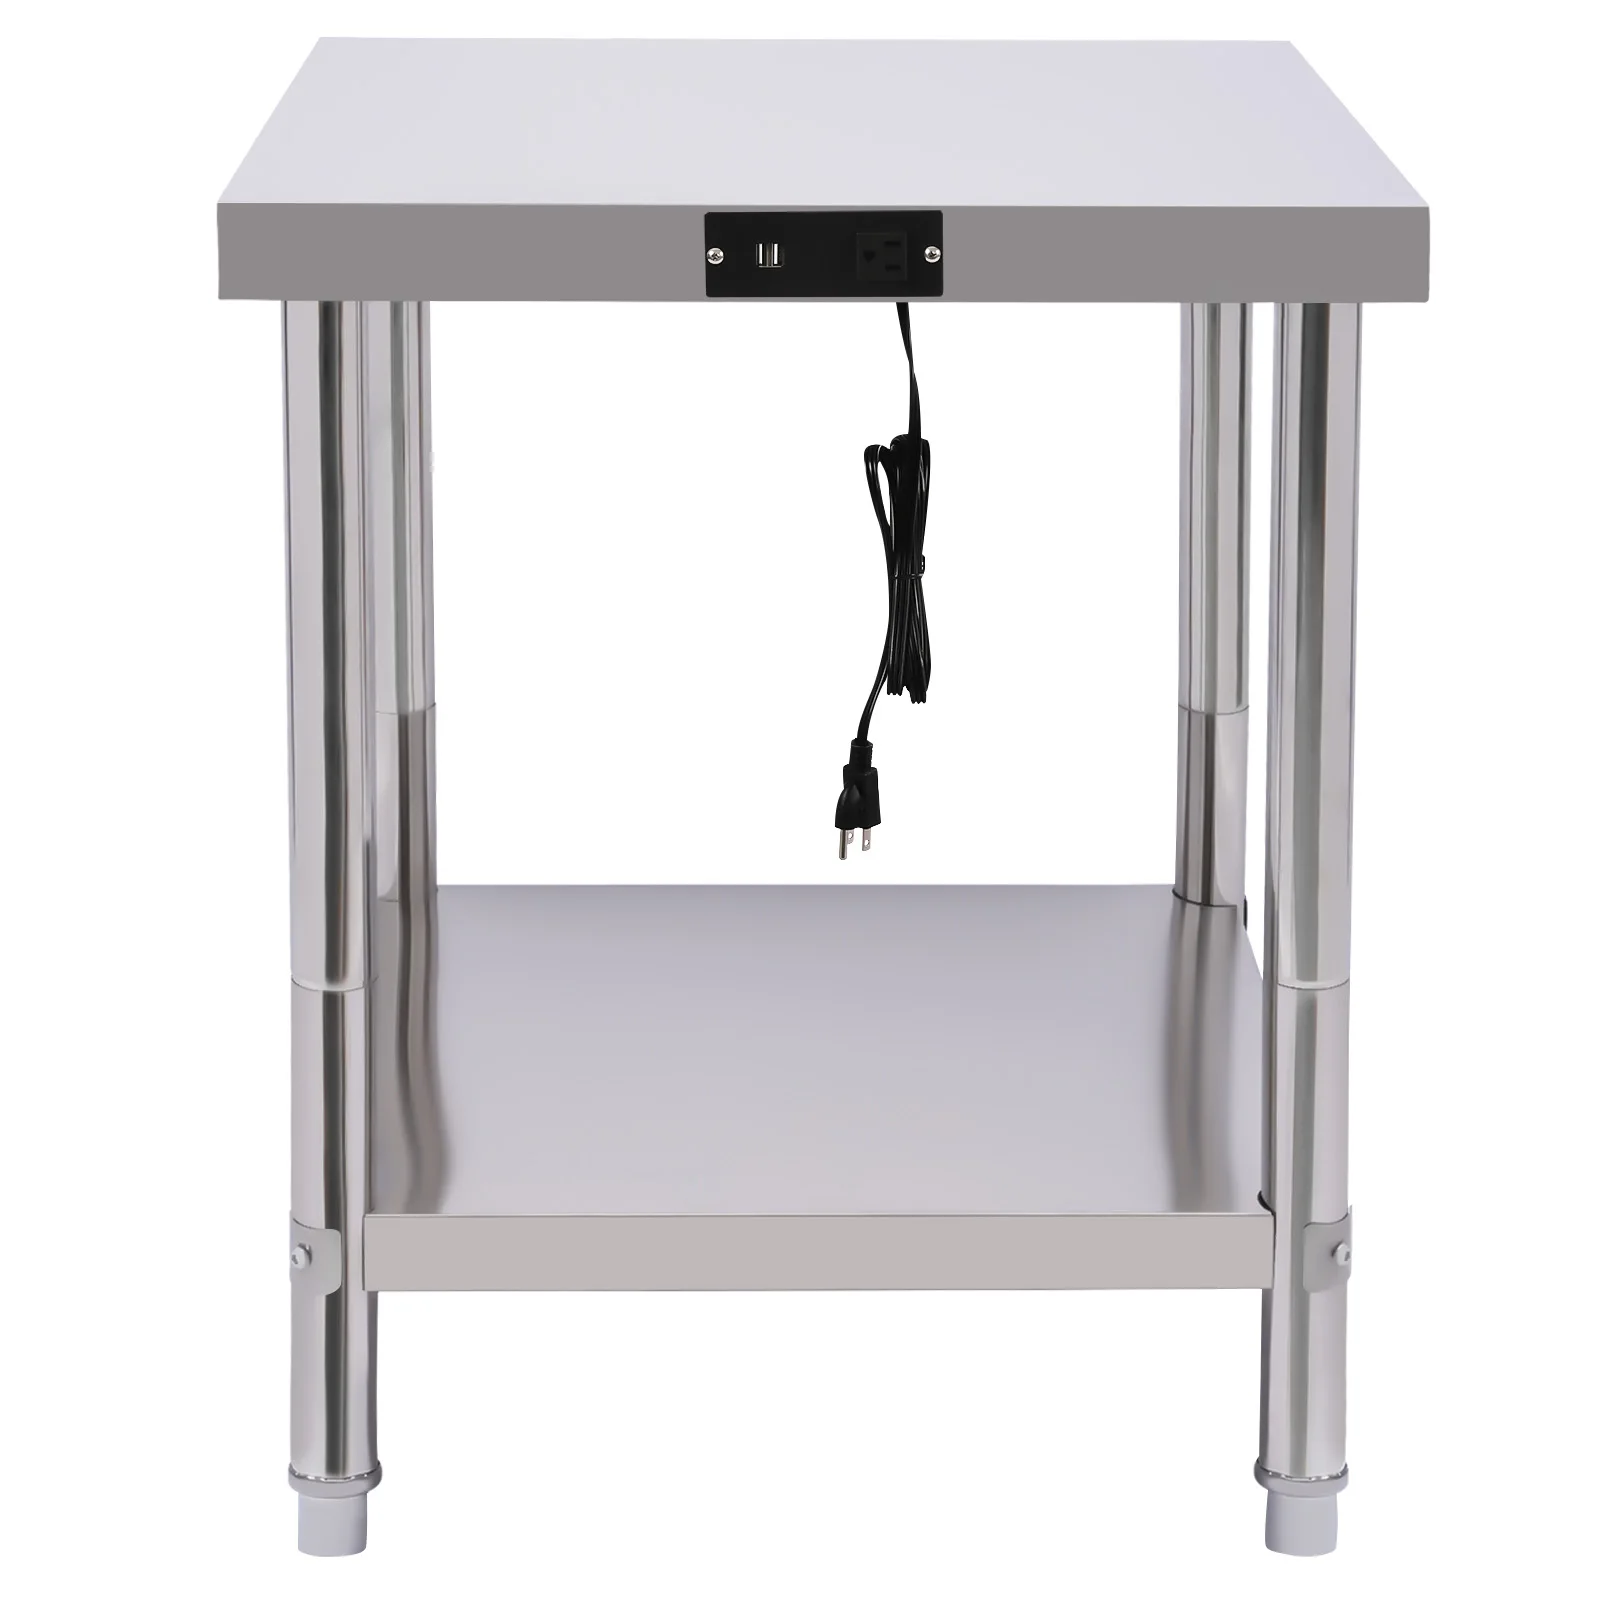 

24 x 24 Inches Worktable Stainless Steel Table Worktop with Sockets for Restaurant, Home and Hotel Work